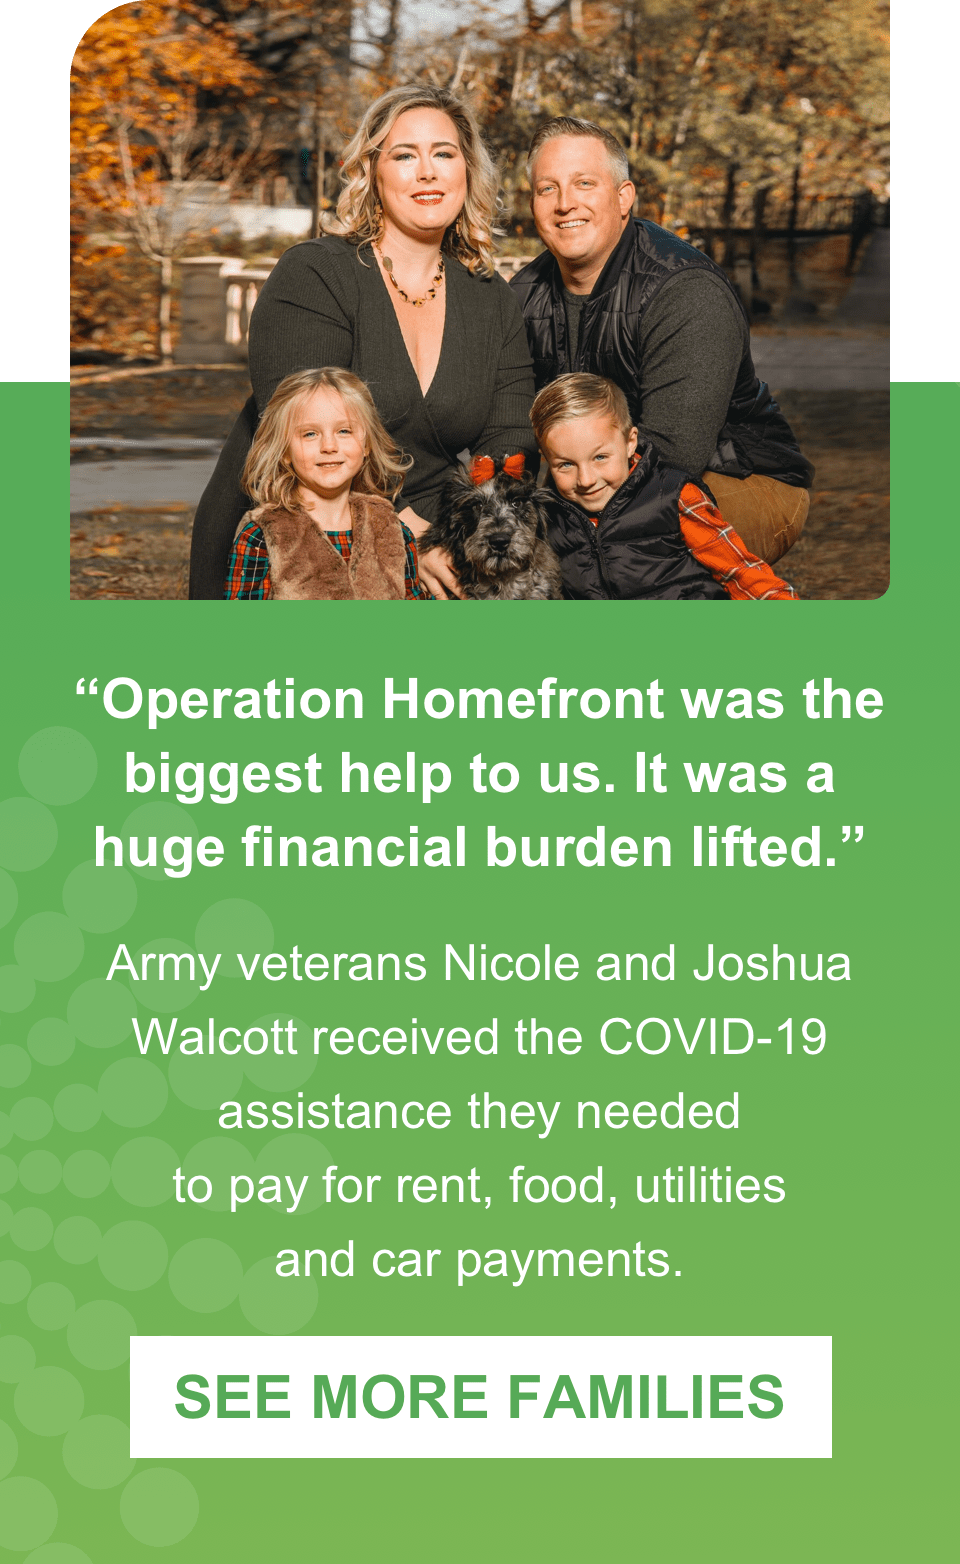 ''''Operation Homefront was the biggest help to us. It was a huge financial burden lifted.''''  Army veterans Nicole and Joshua Walcott received $3,500 in COVID-19 assistance.  See More Families